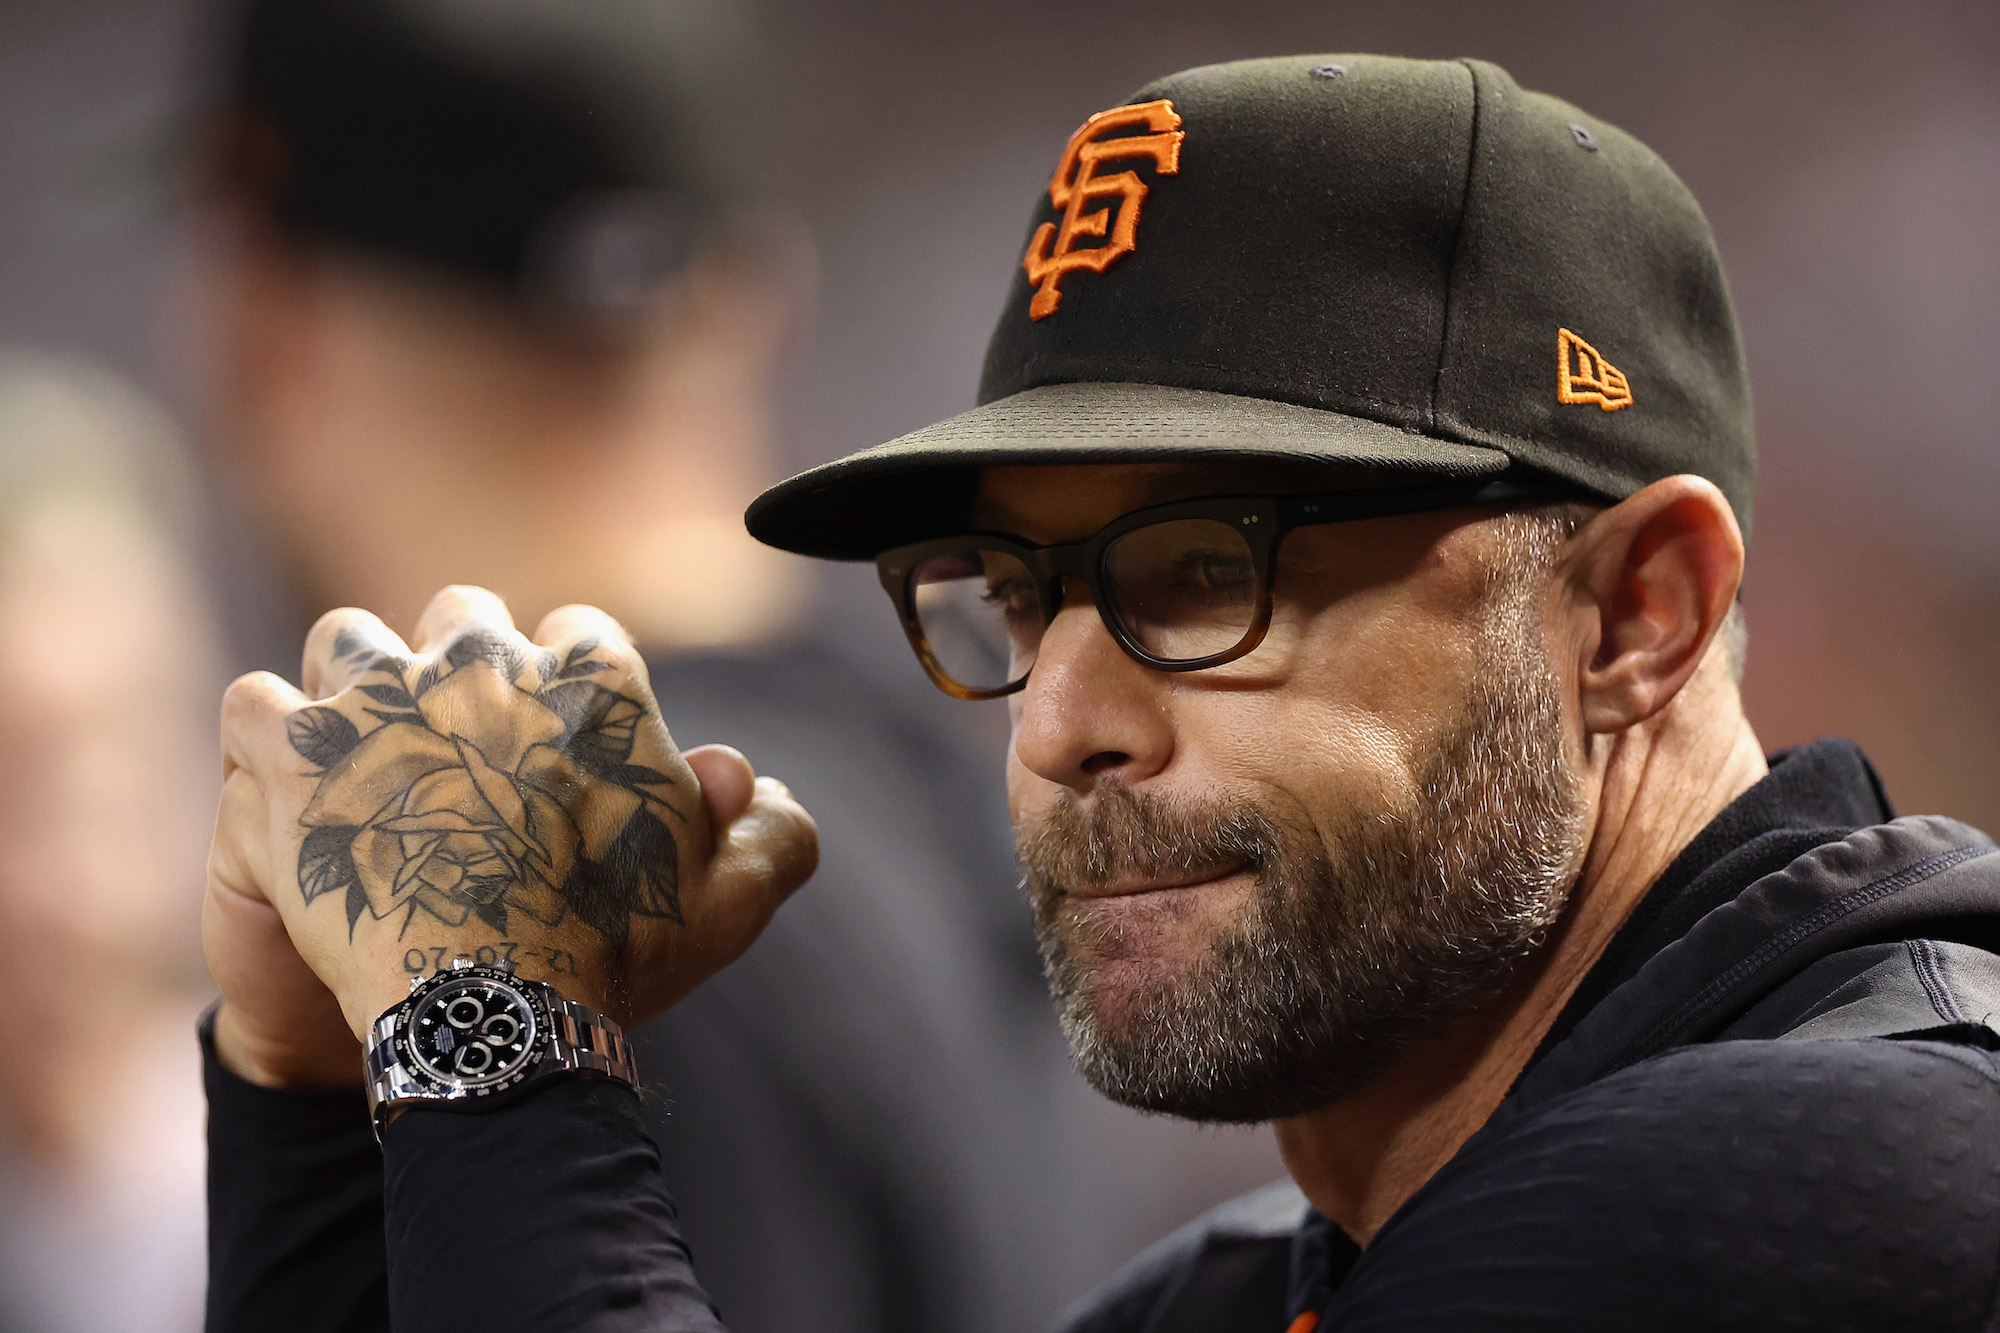 PHOENIX, ARIZONA - SEPTEMBER 19: Manager Gabe Kapler #19 of the San Francisco Giants watches from the dugout during the first inning of the MLB game against the Arizona Diamondbacks at Chase Field on September 19, 2023 in Phoenix, Arizona. (Photo by Christian Petersen/Getty Images)